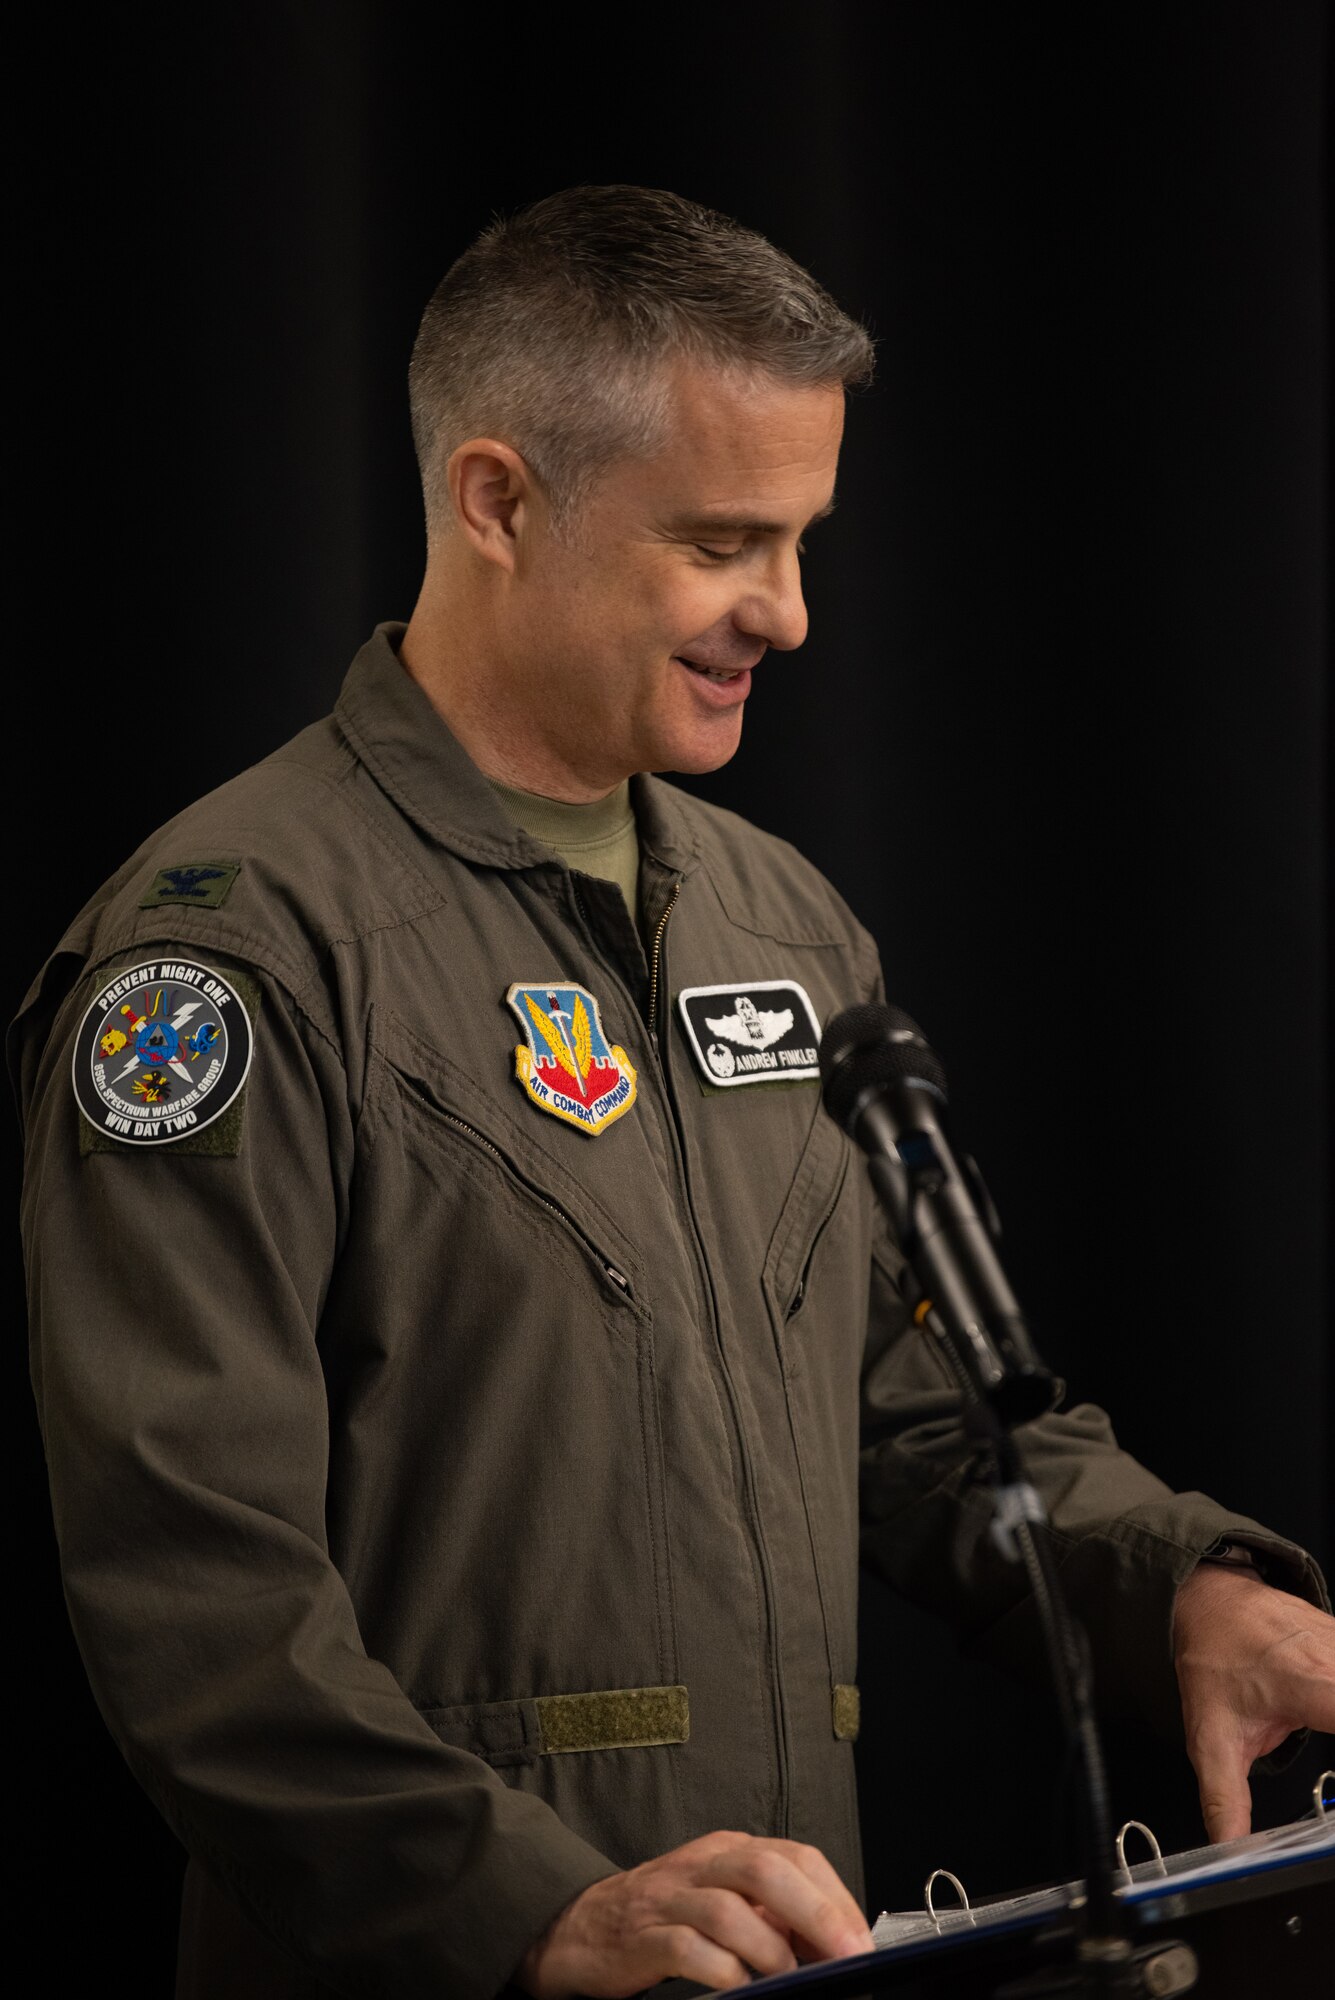 U.S. Air Force Col. Andrew J. Finkler, 850th Spectrum Warfare Group commander, delivers opening remarks during the reactivation ceremony for 563rd Electronic Warfare Squadron, San Antonio, Texas, April 25, 2024. Some attendees taught or underwent training while the 563rd EWS was previously active. The squadron deactivated in 2010 and now performs a software development mission to enhance 350th Spectrum Warfare Wing’s electromagnetic spectrum operations.  (U.S. Air Force photo by Jarrod M. Vickers)